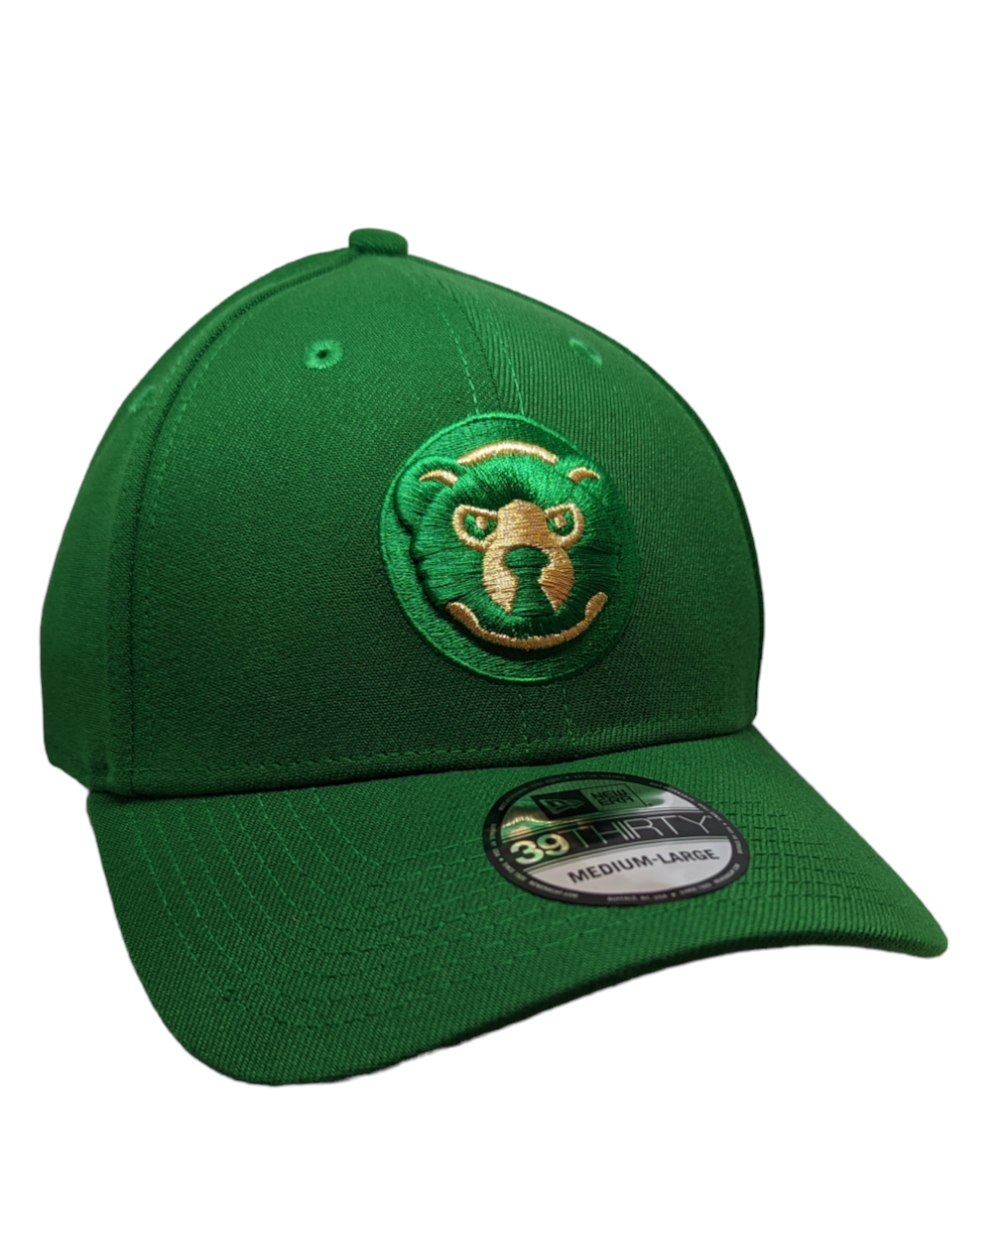 Chicago Cubs Halfway To St. Patrick's Day Kelly Green 39THIRTY Flex Fit New Era Hat